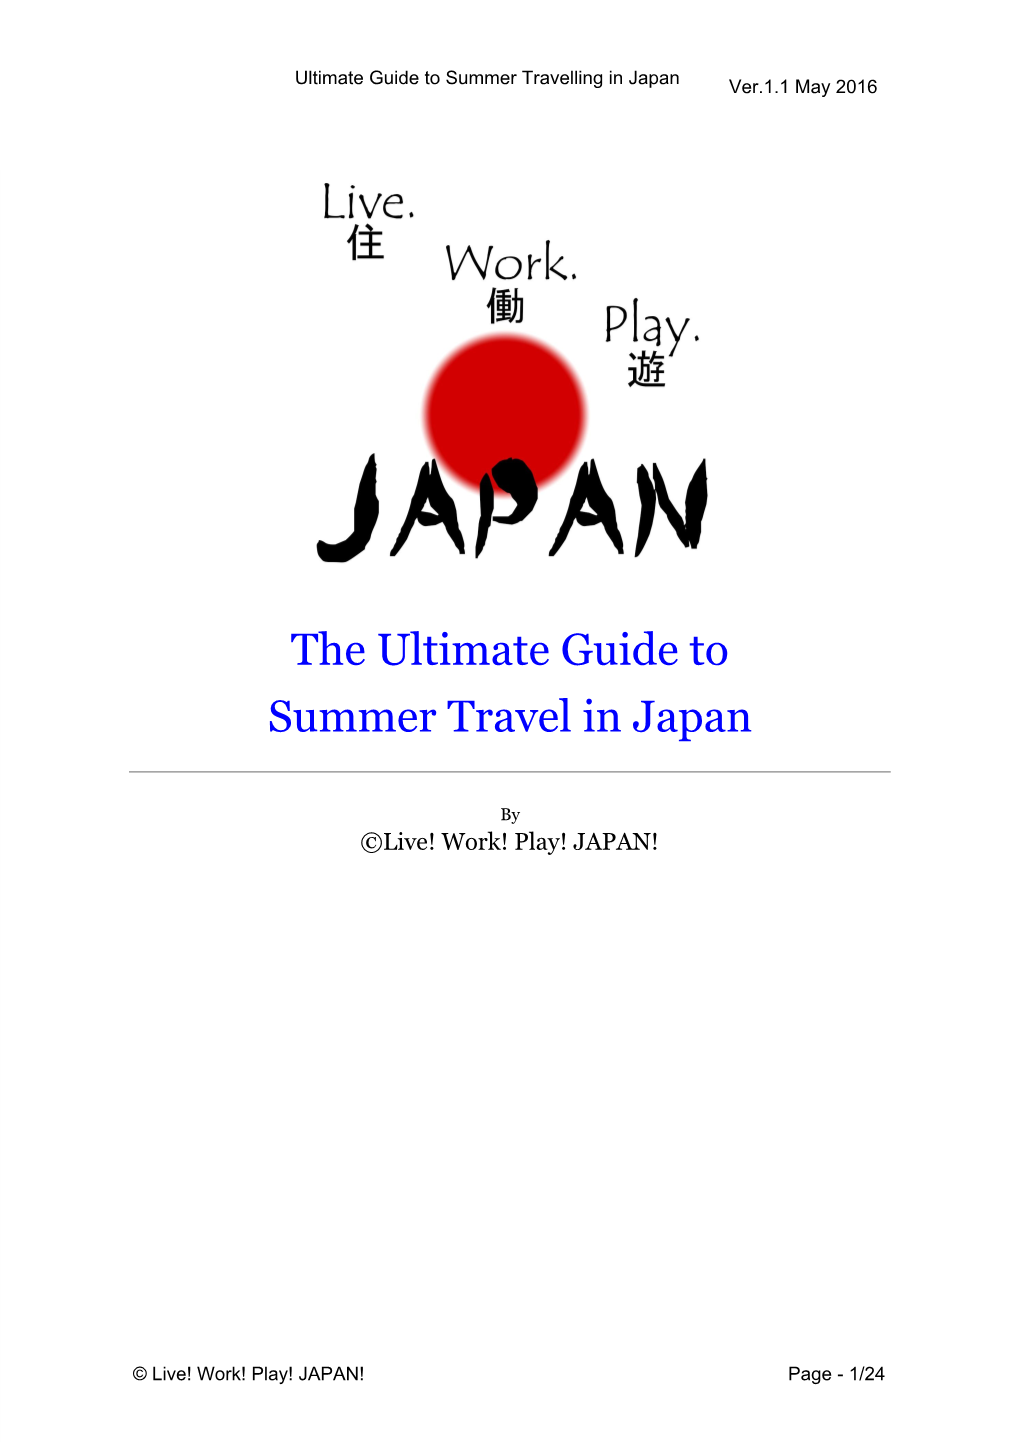 The Ultimate Guide to Summer Travel in Japan